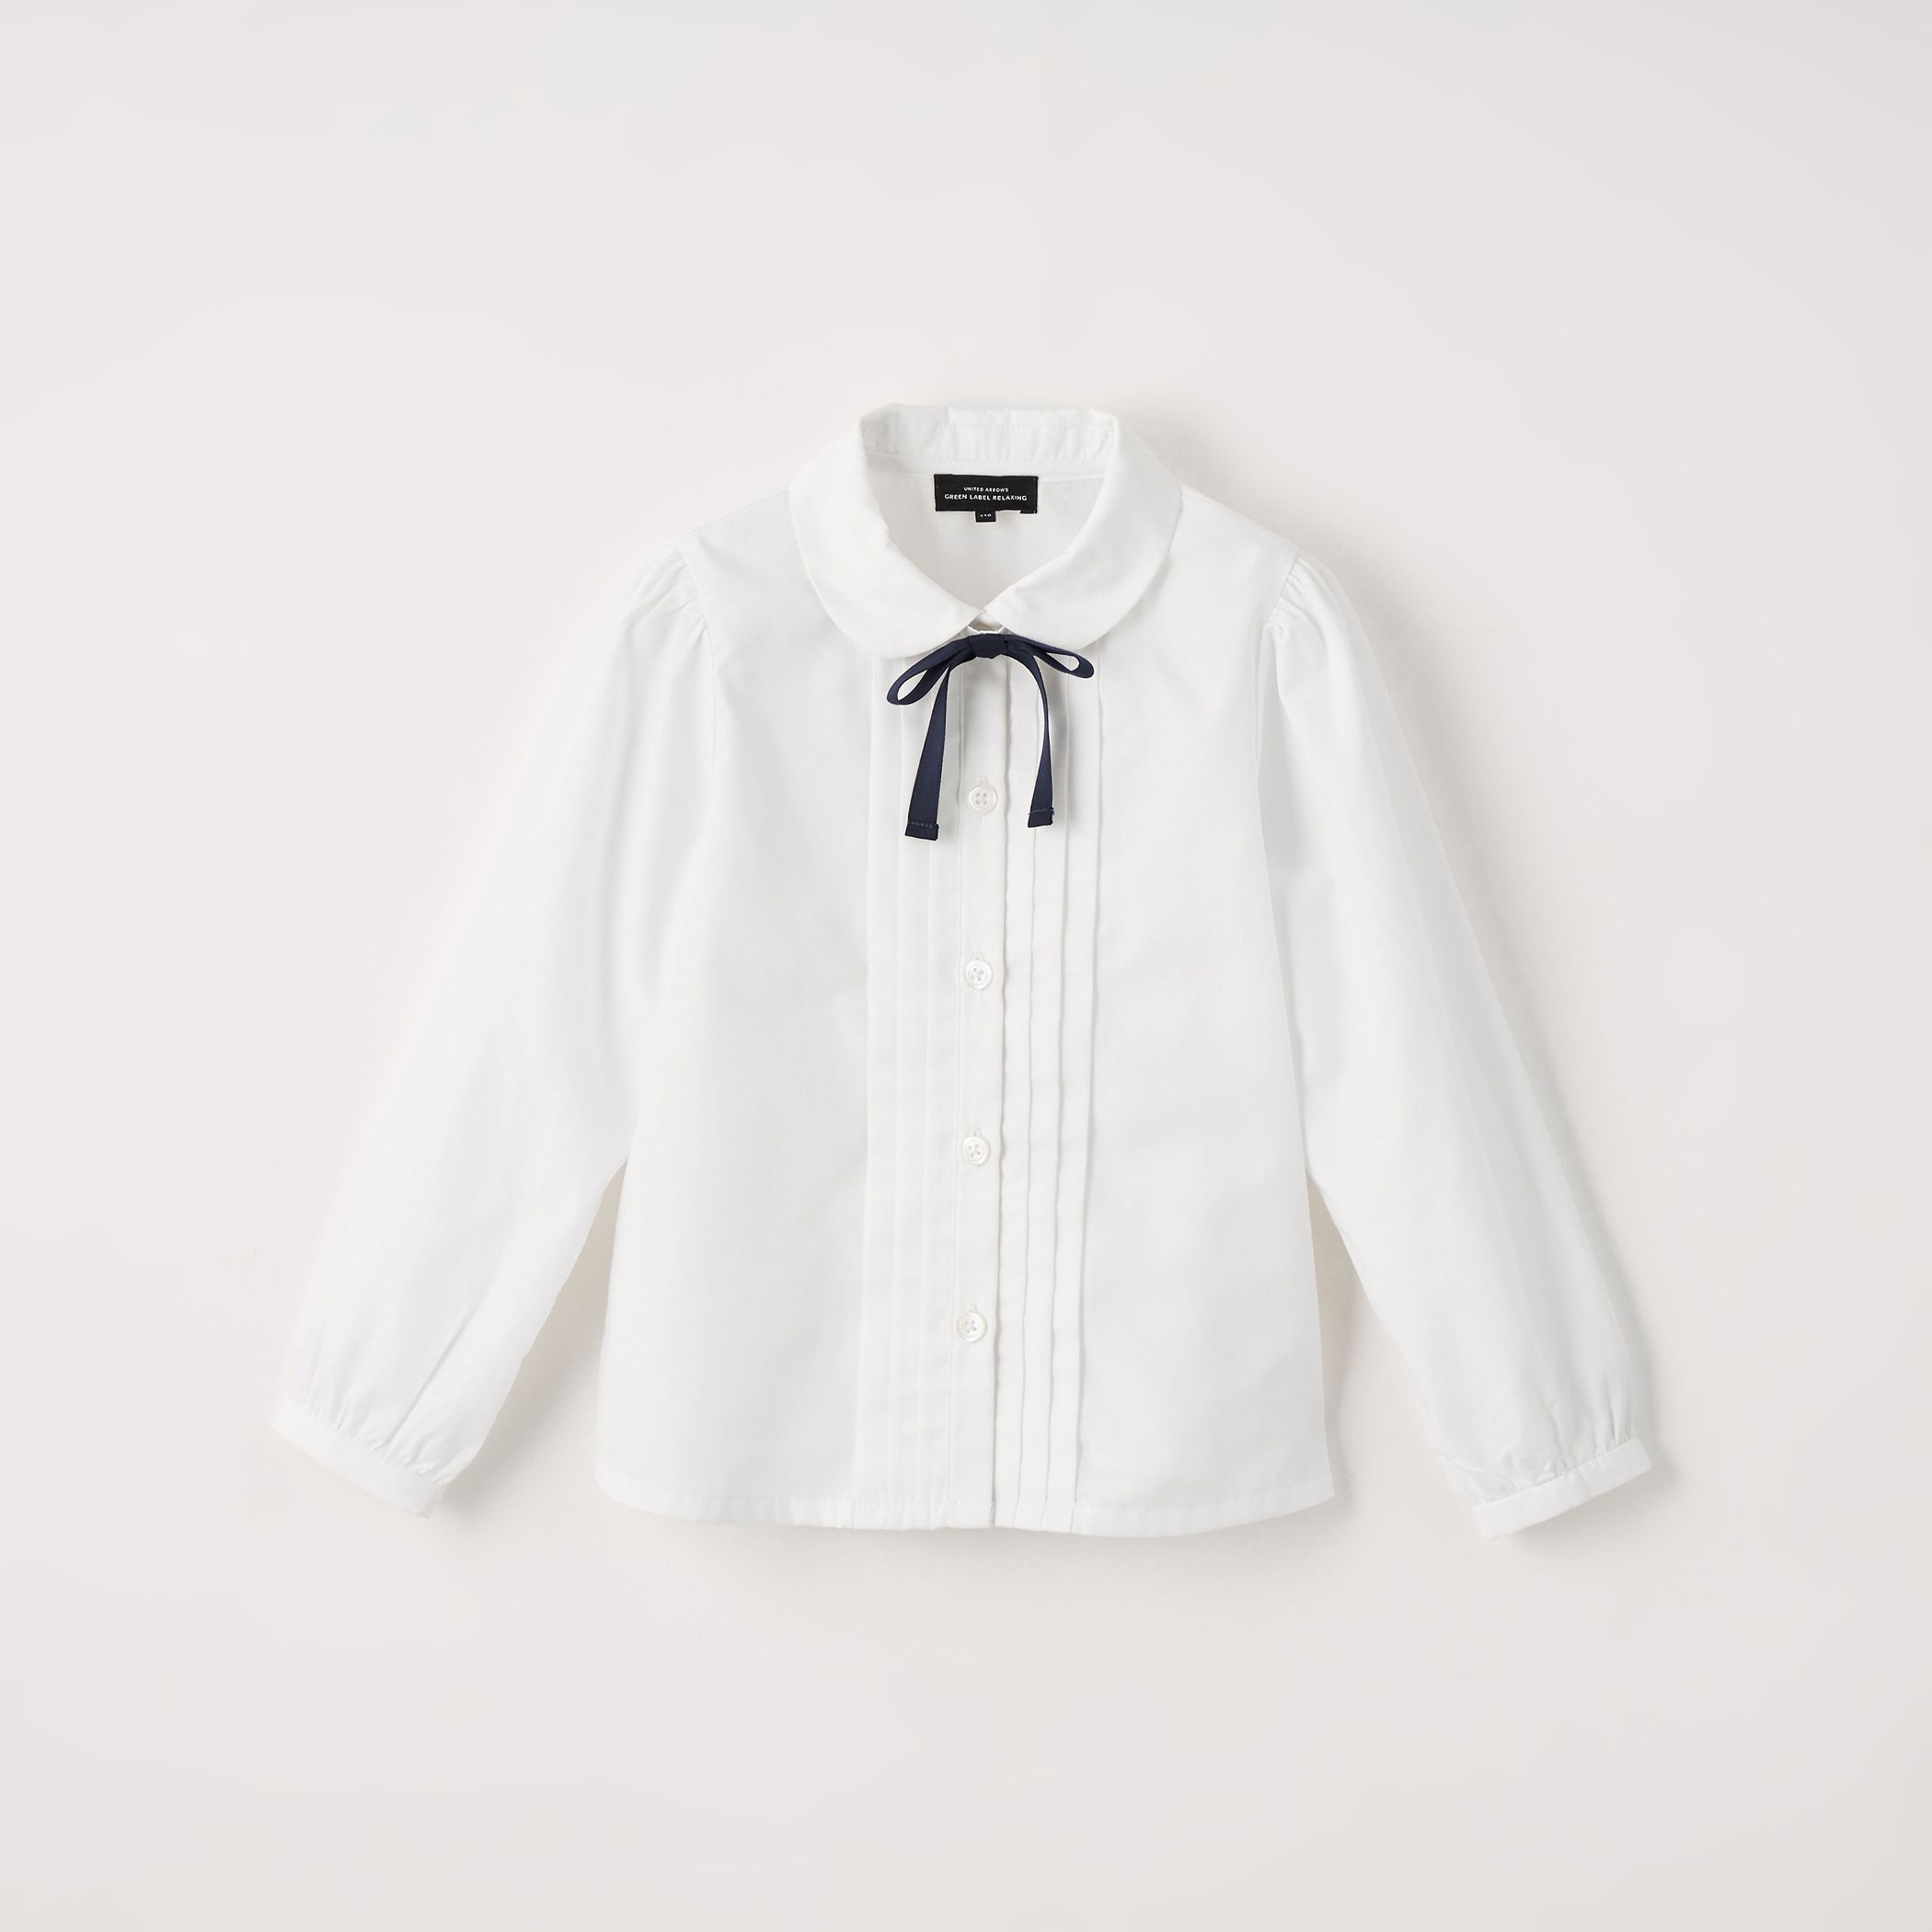  UNITED ARROWS green label relaxing：KID’S(ユナイテッドアローズ グリーンレーベル リラクシング)/リボンタック マルエリ ブラウス